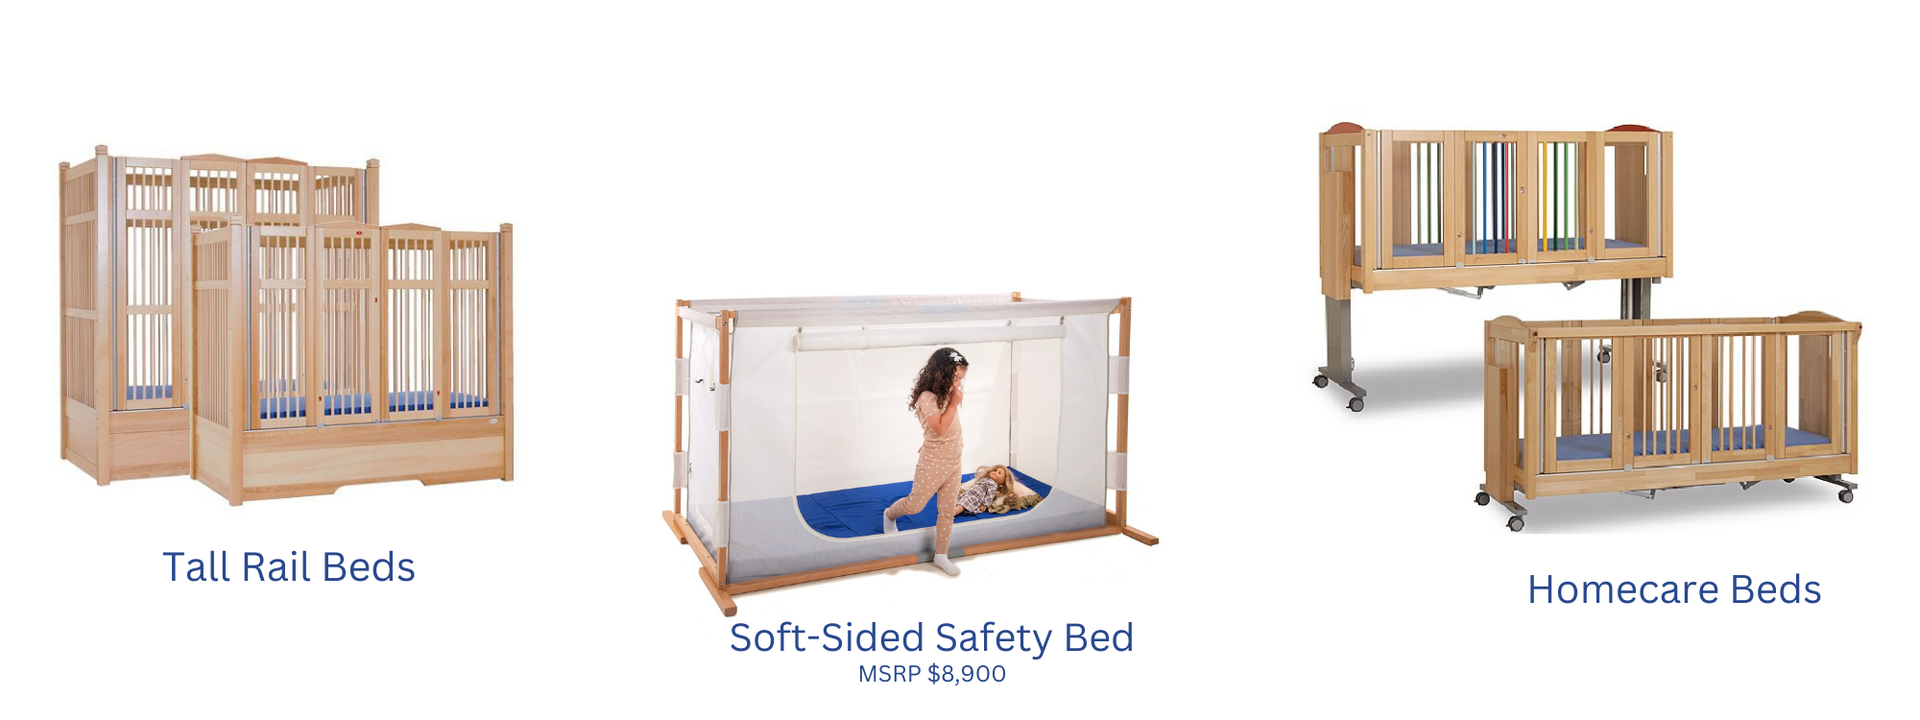 Beds for children with special needs